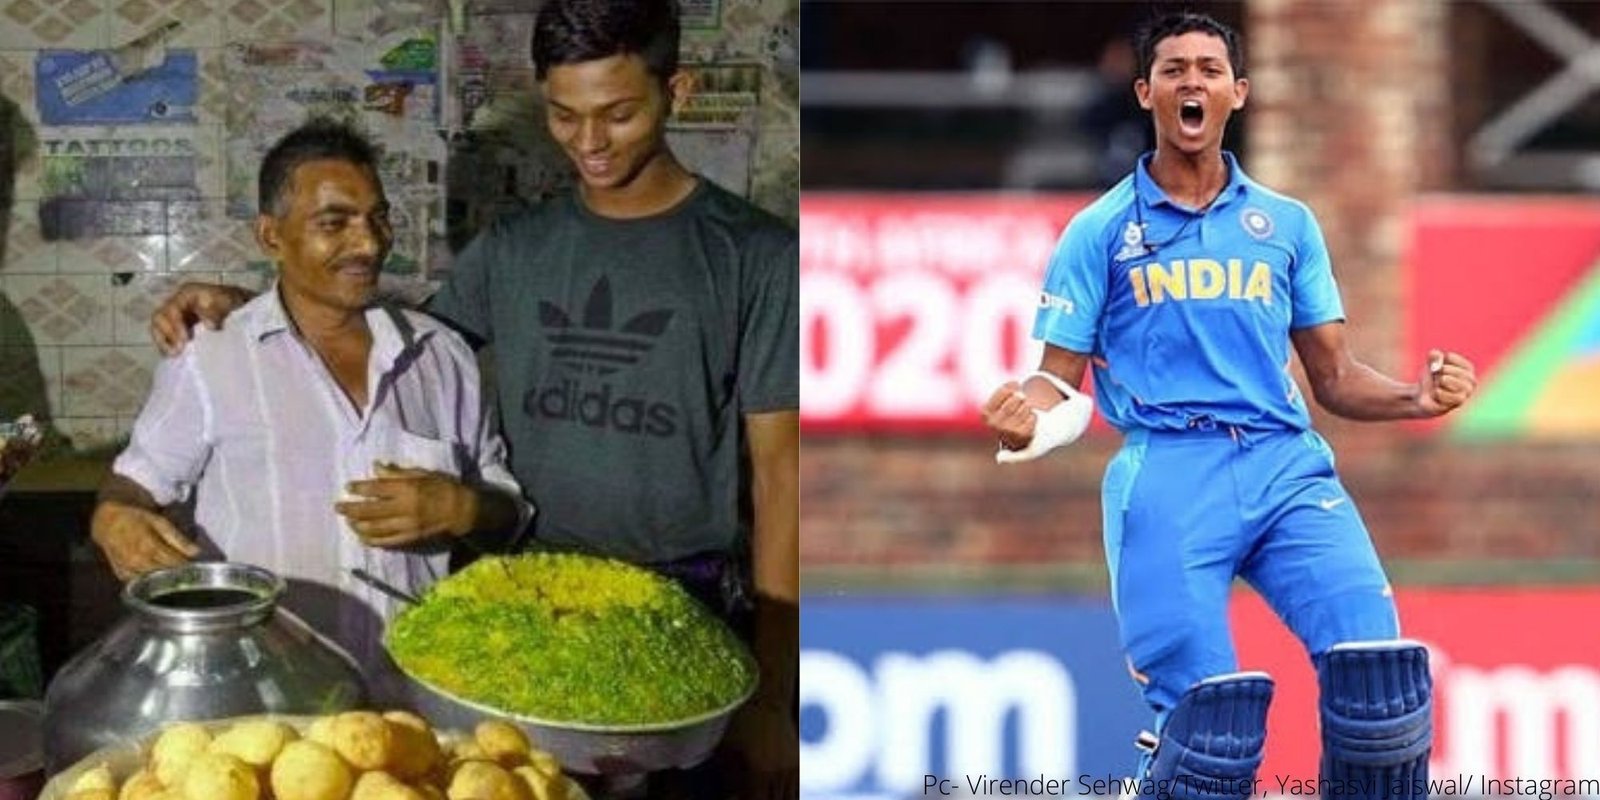 From Selling Pani-Puri To Breaking Records In Indian Cricket, Yashasvi Jaiswal Is A Star In The Making